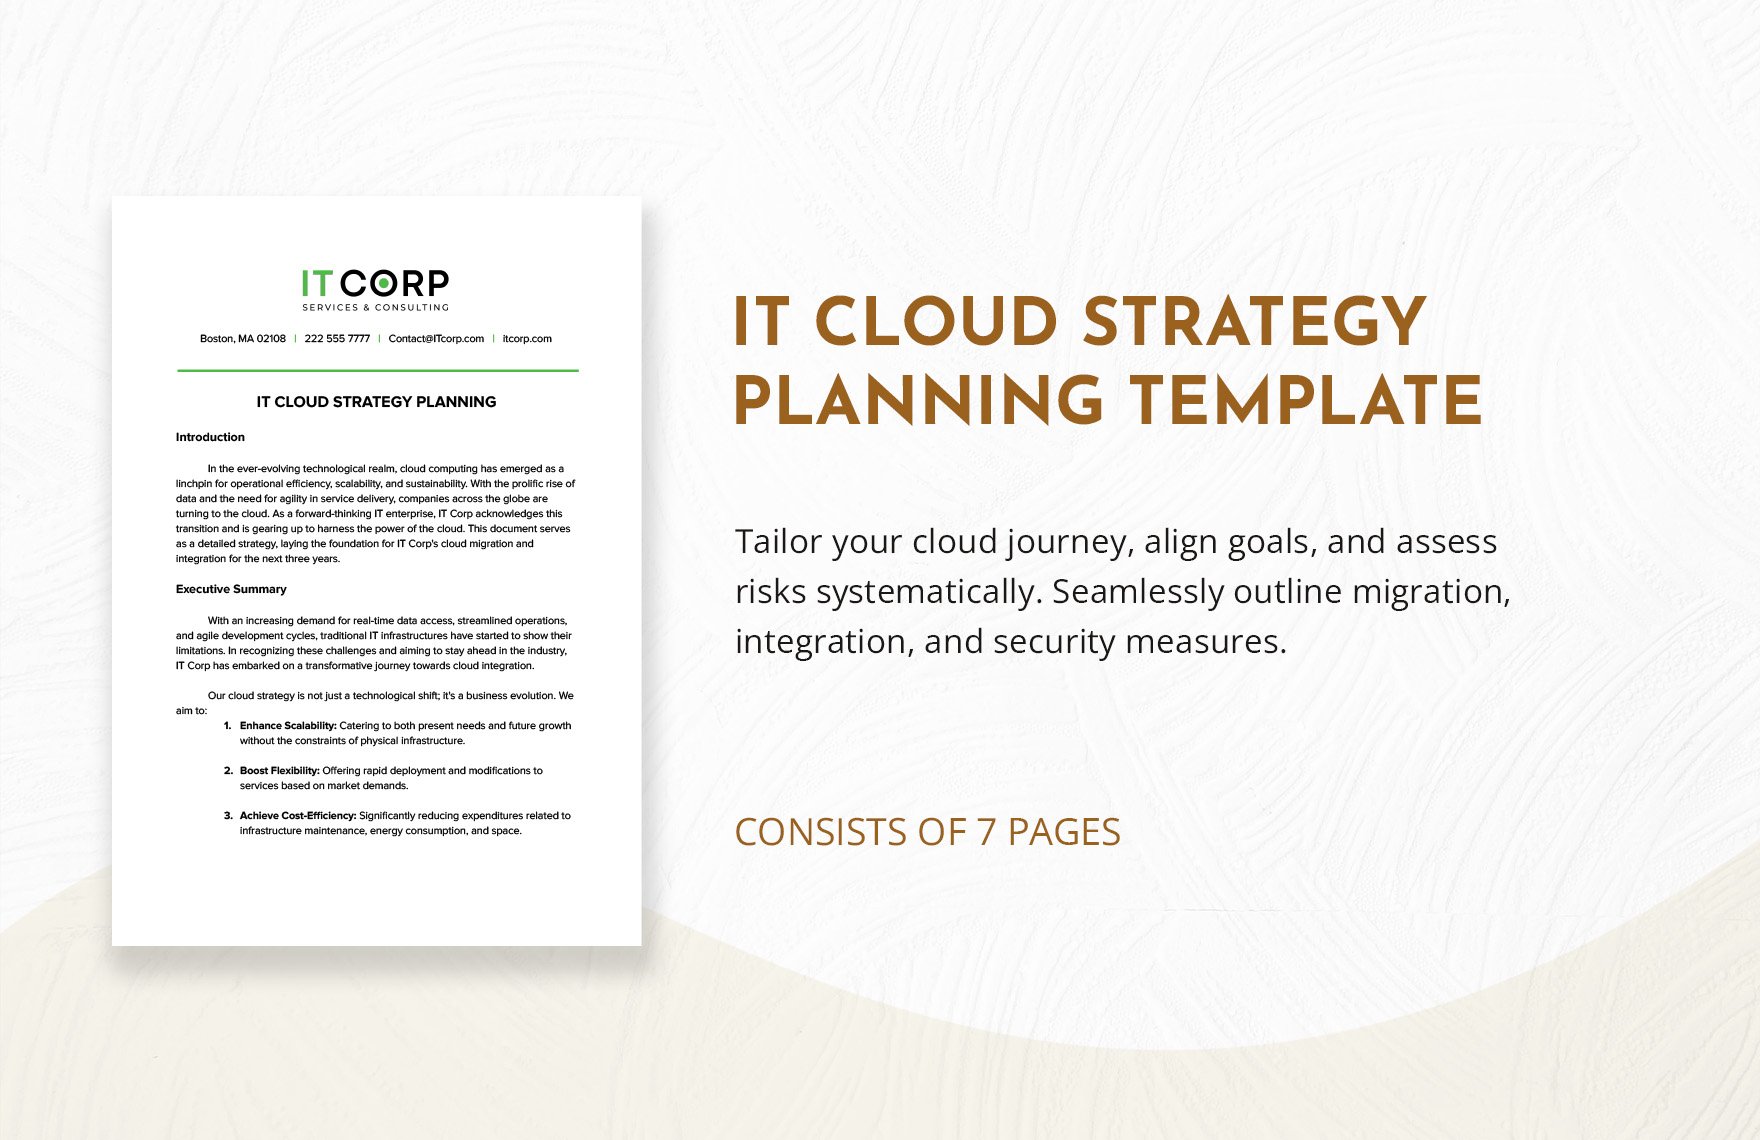 IT Cloud Strategy Planning Template